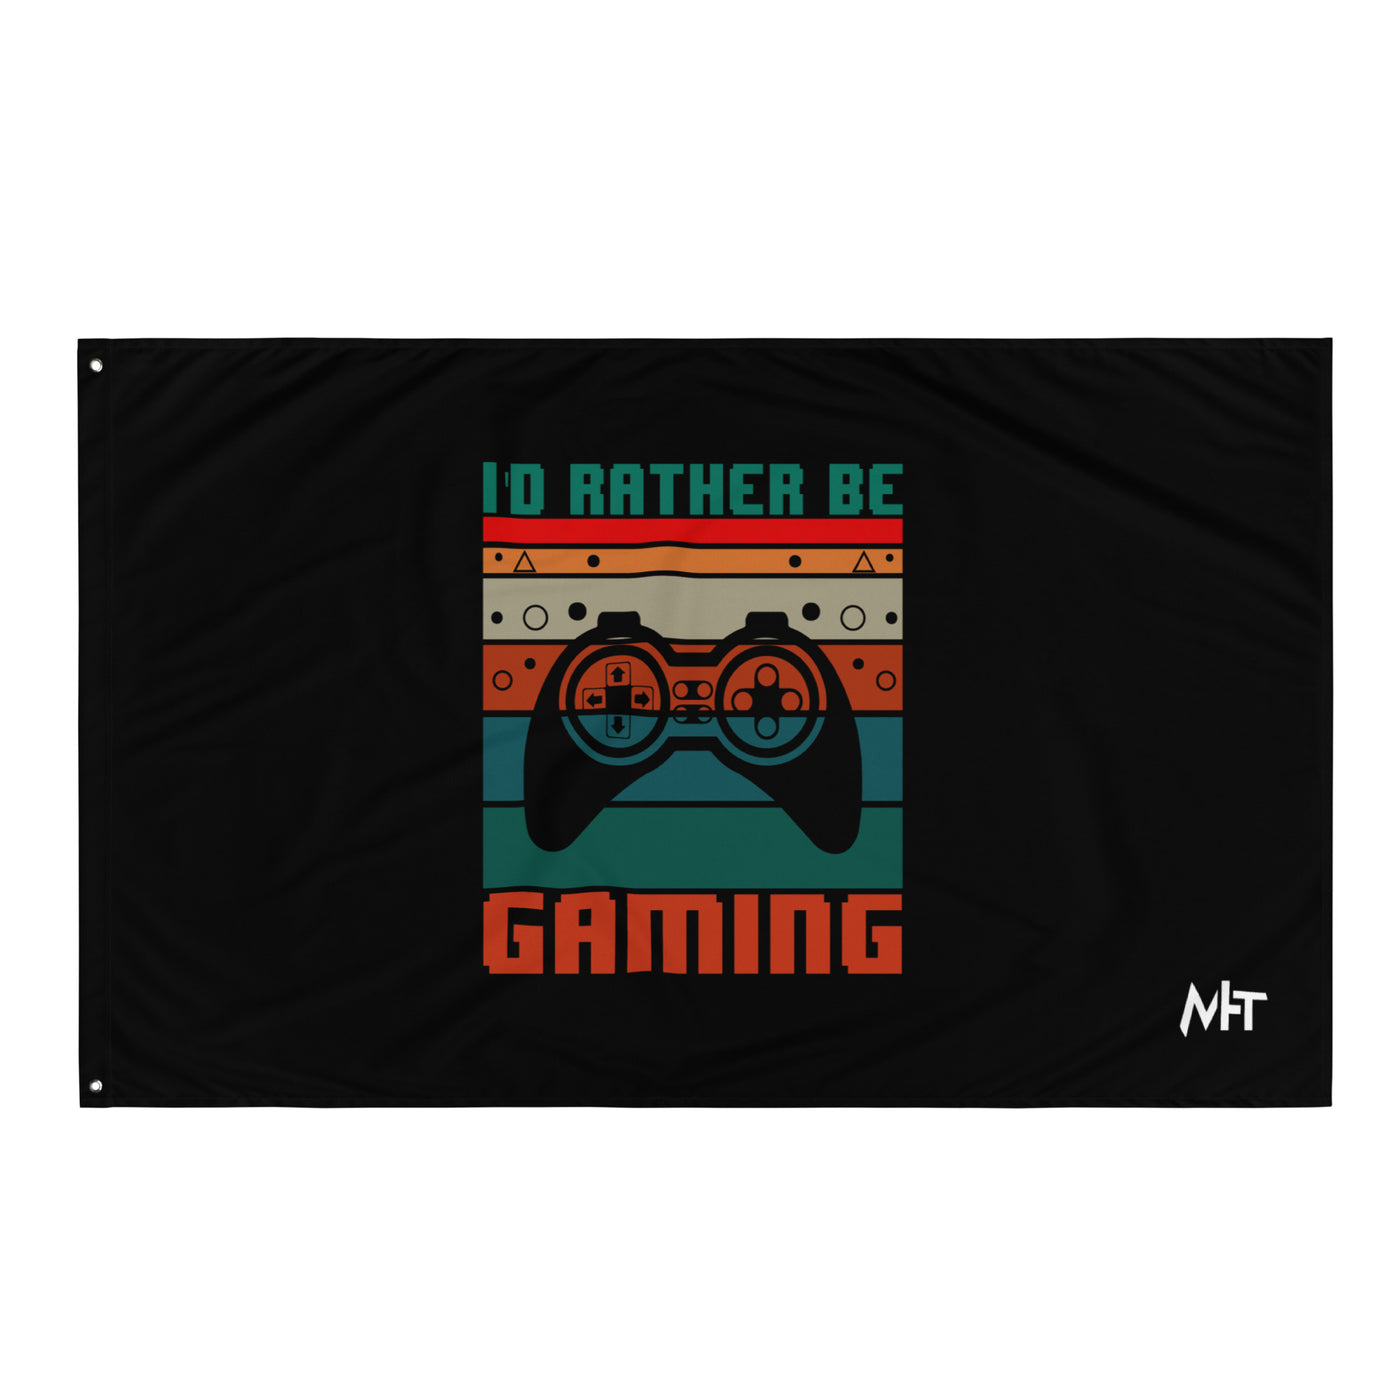 I'd rather be Gaming - Flag